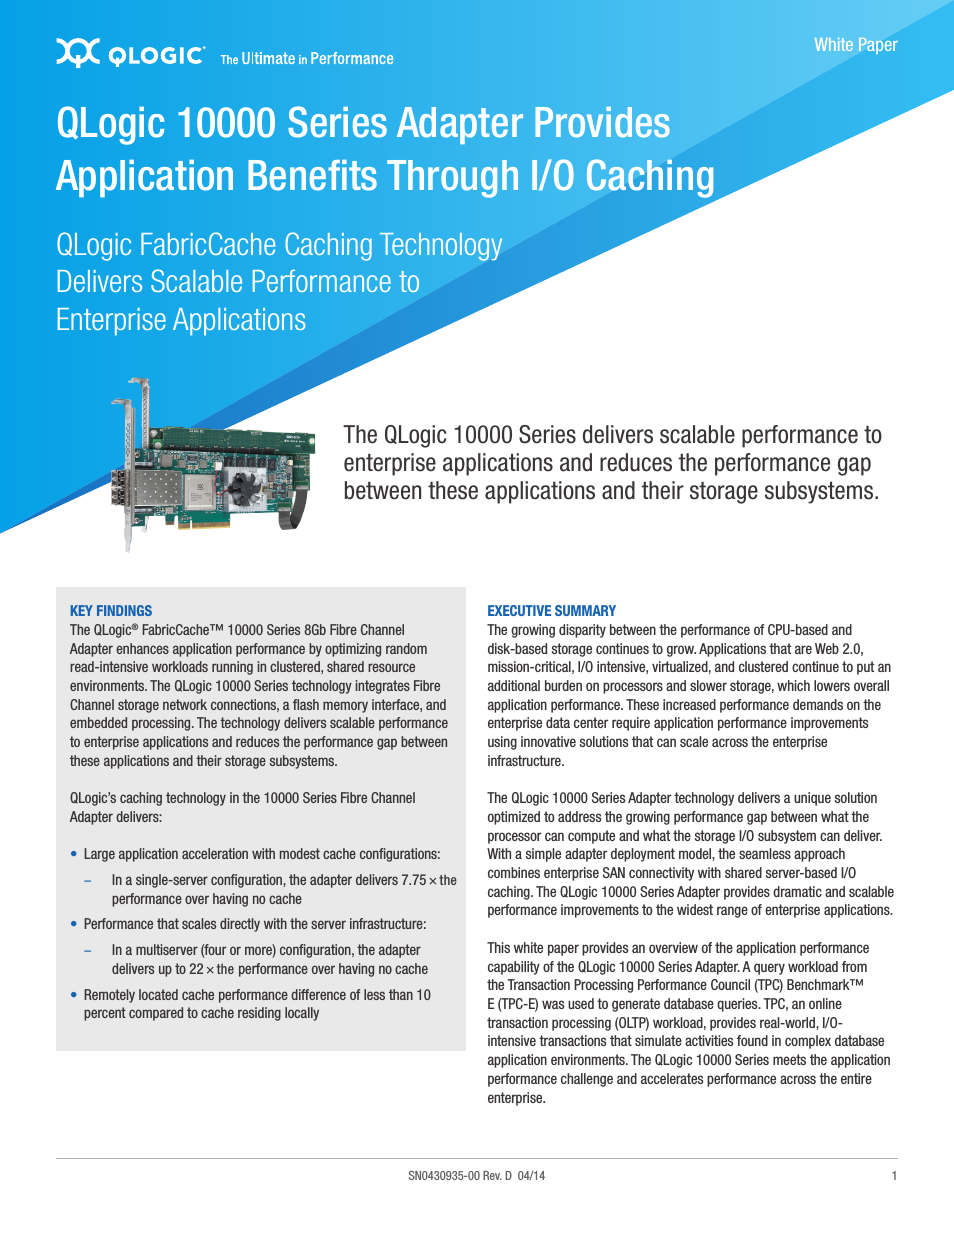 10000 Series Adapter Provides Application Benefits Through I_O Caching